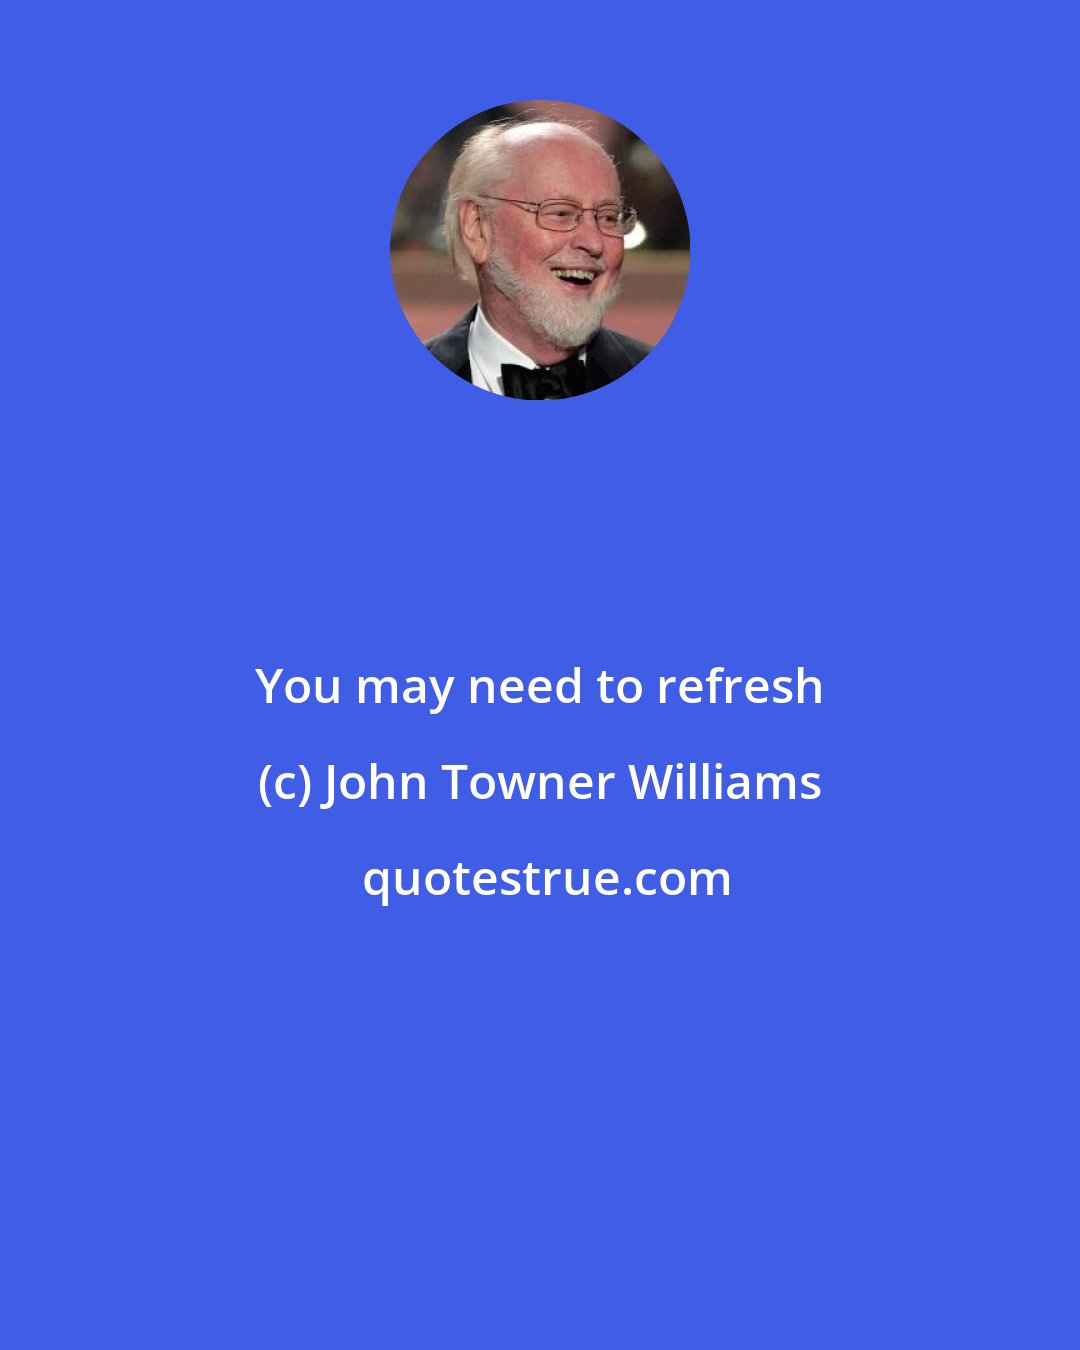 John Towner Williams: You may need to refresh